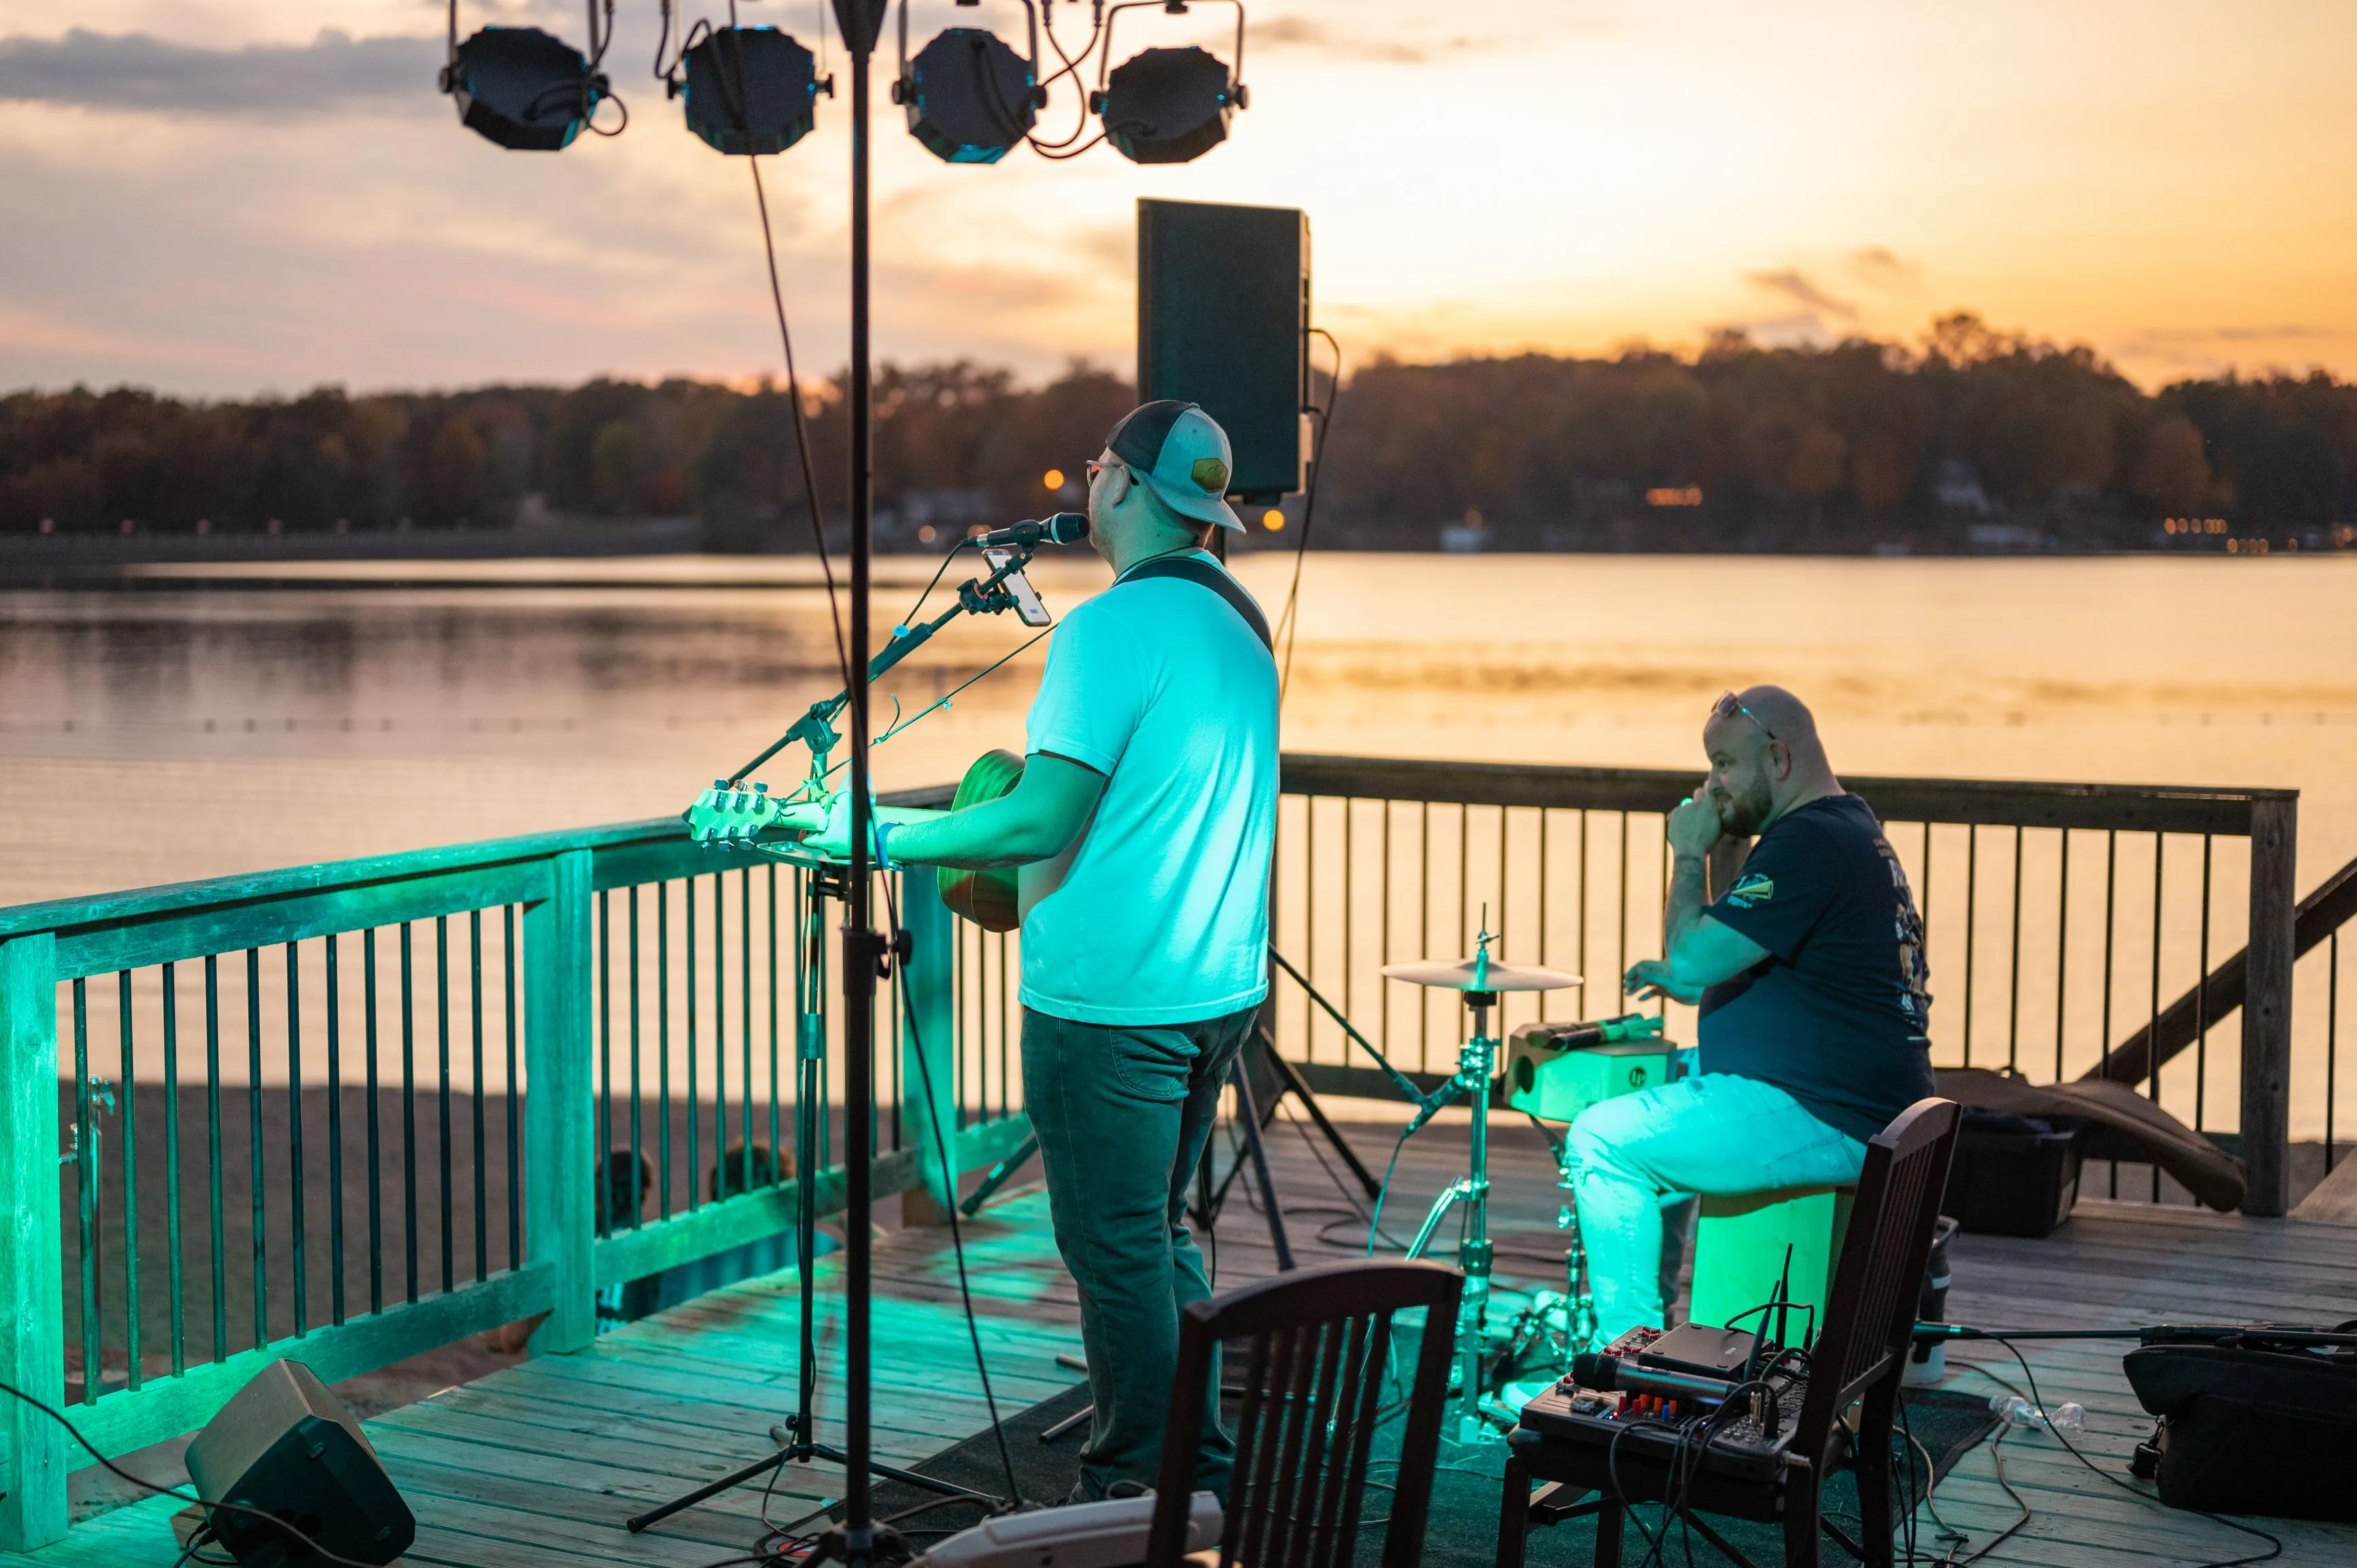 Musician performing on a pier at sunset with a calm lake in the background.